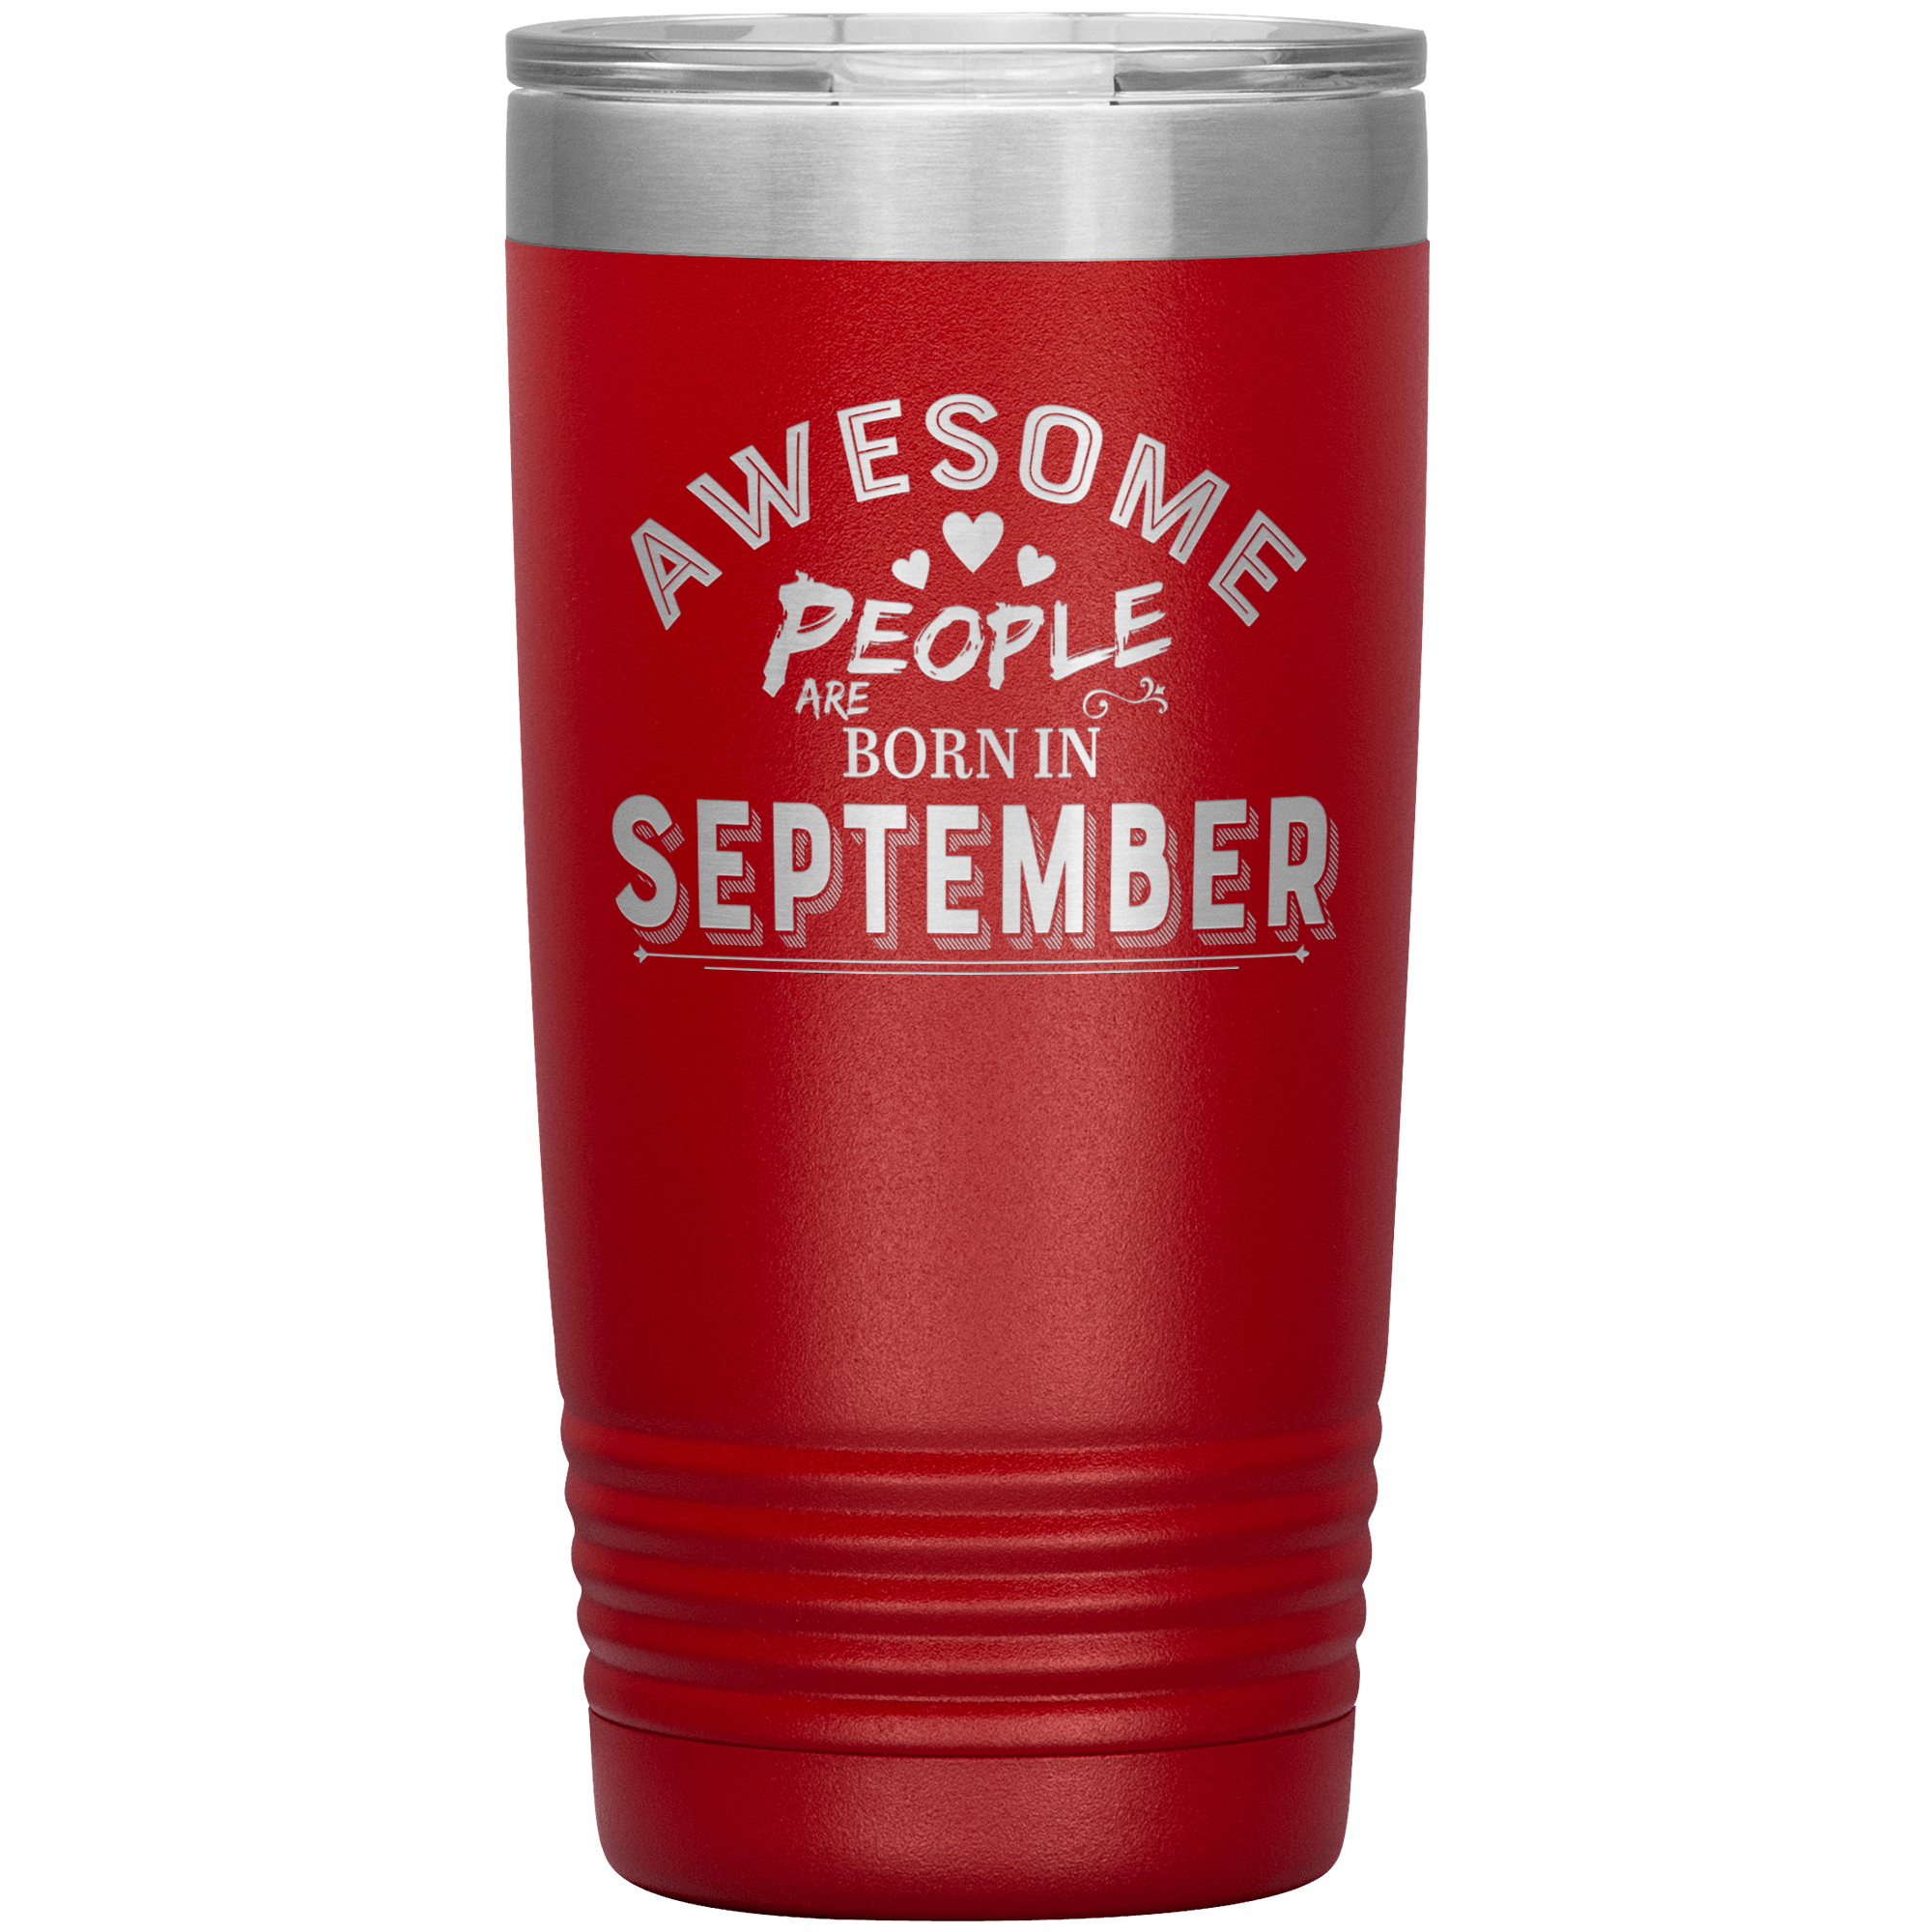 "AWESOME PEOPLE ARE BORN IN SEPTEMBER" Tumbler